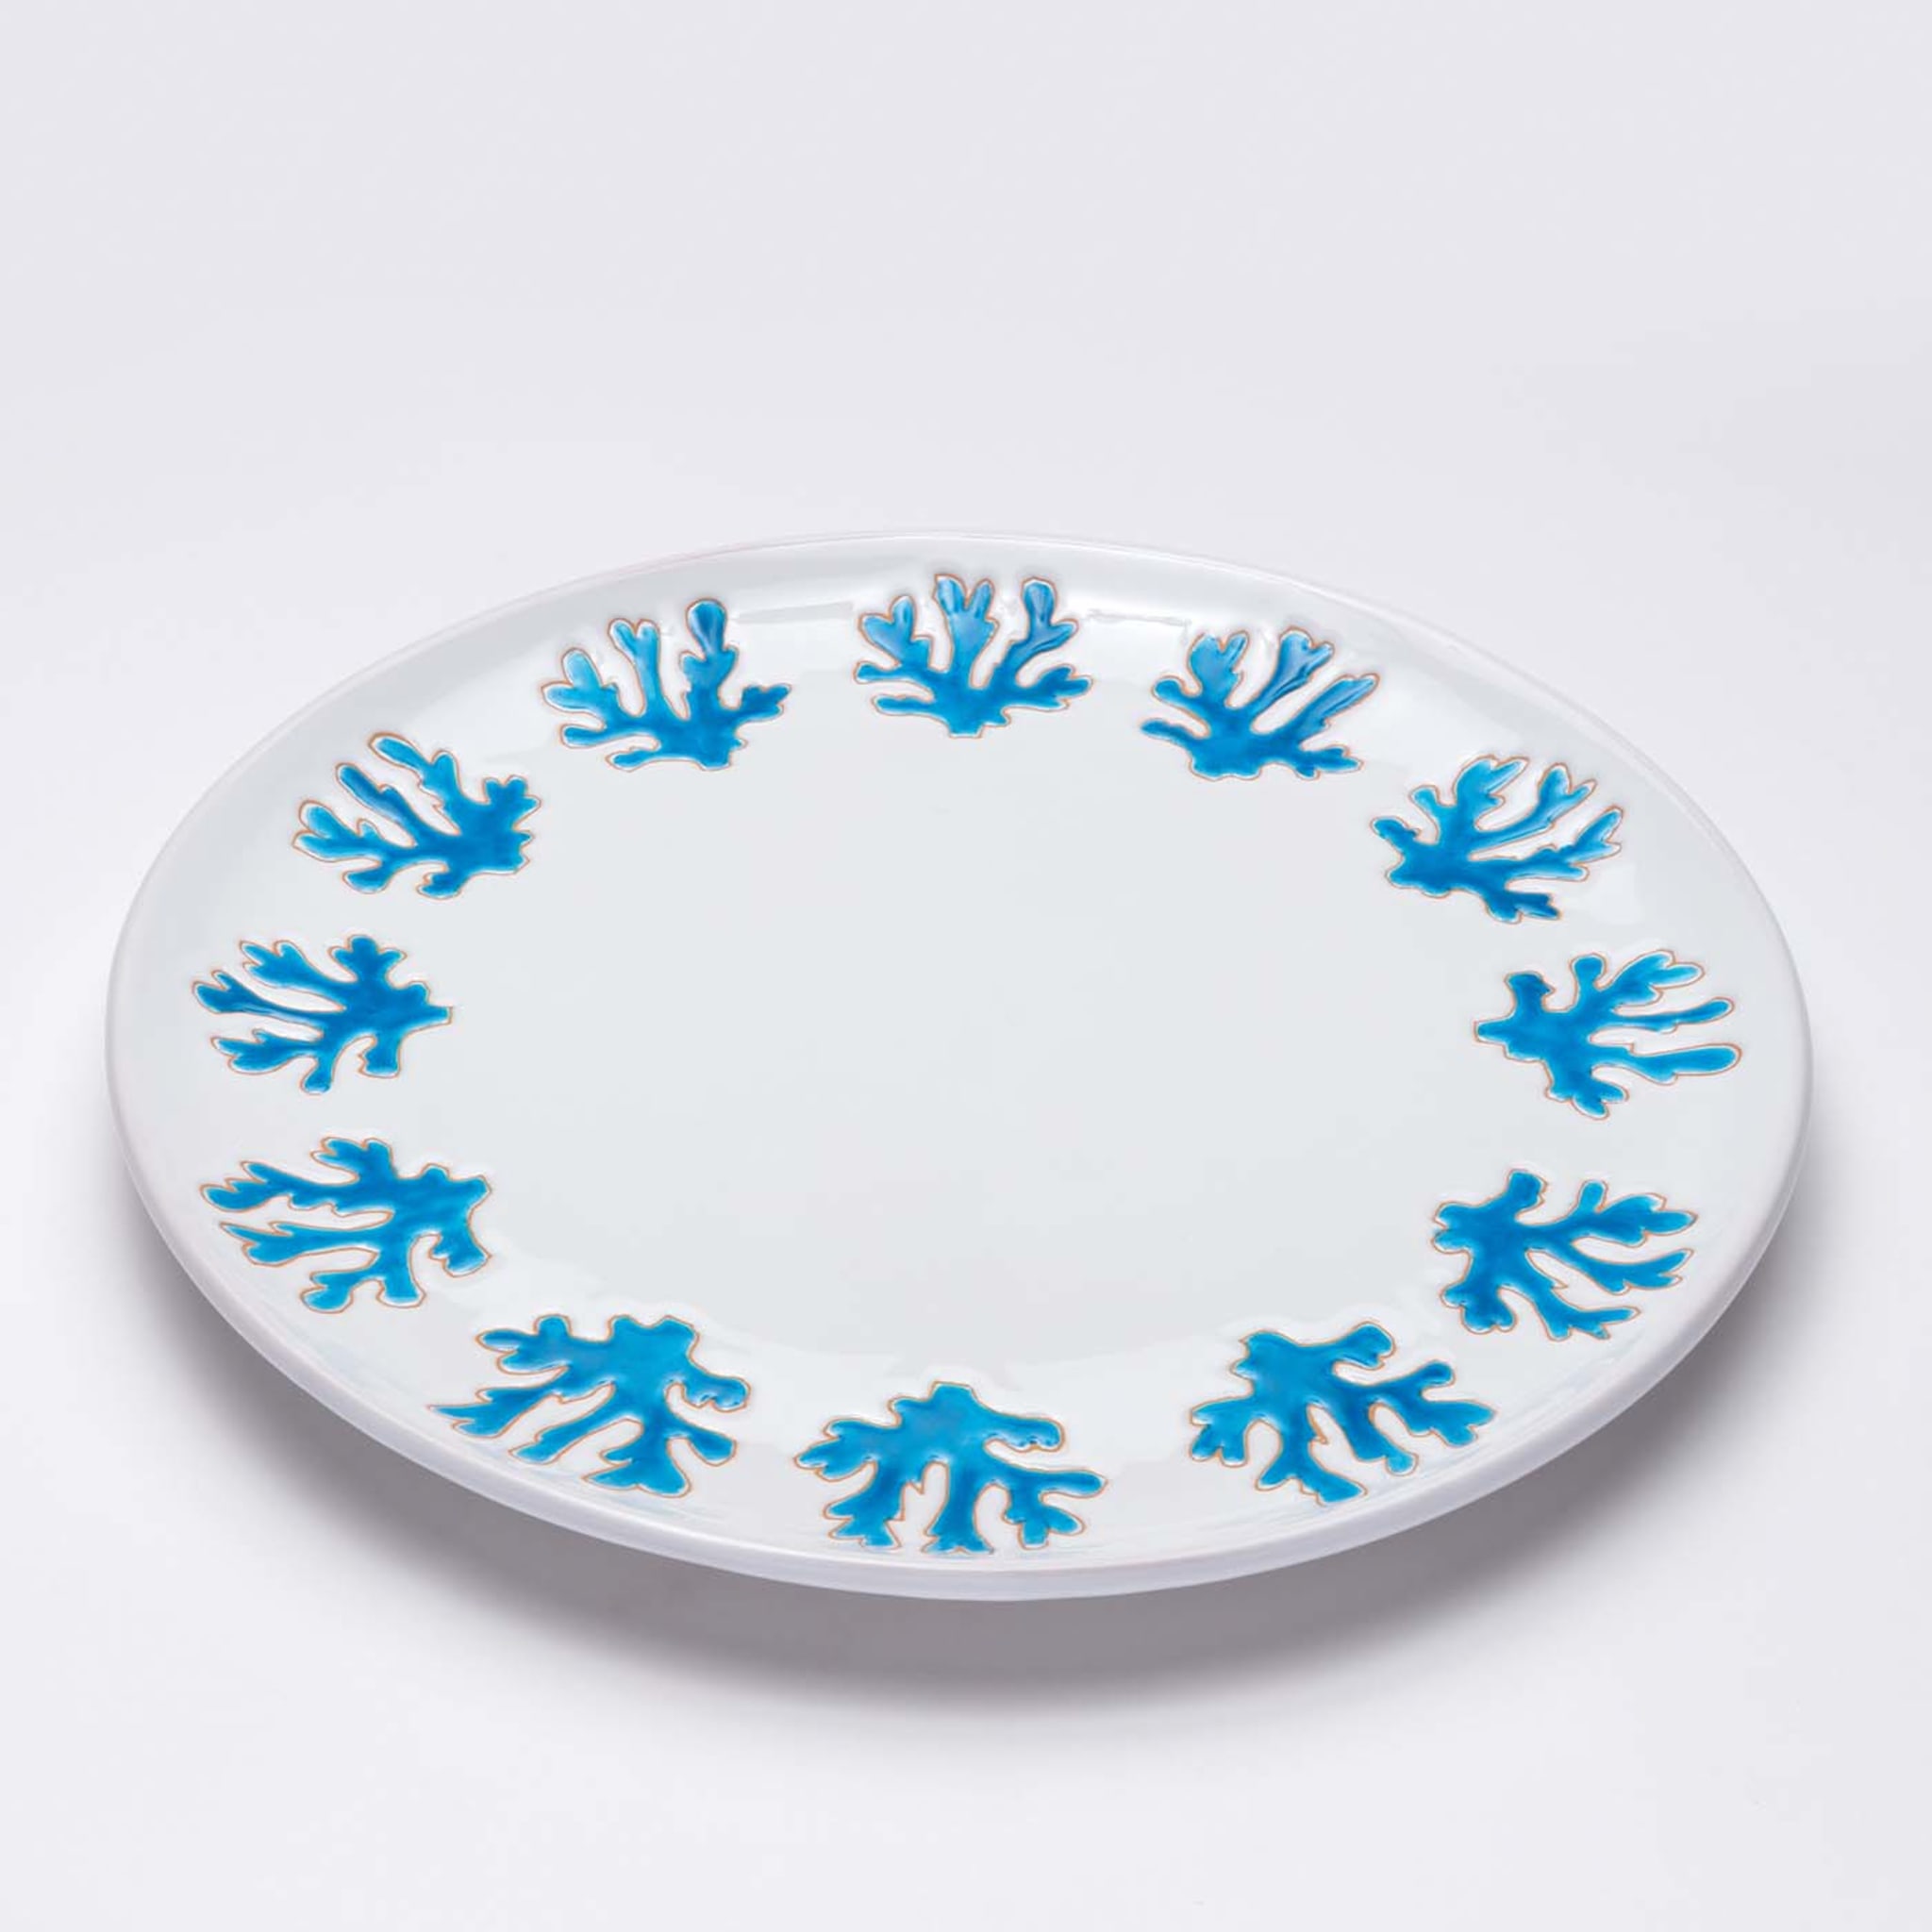 Corallo Turquoise Round Dinner Plate - Alternative view 4